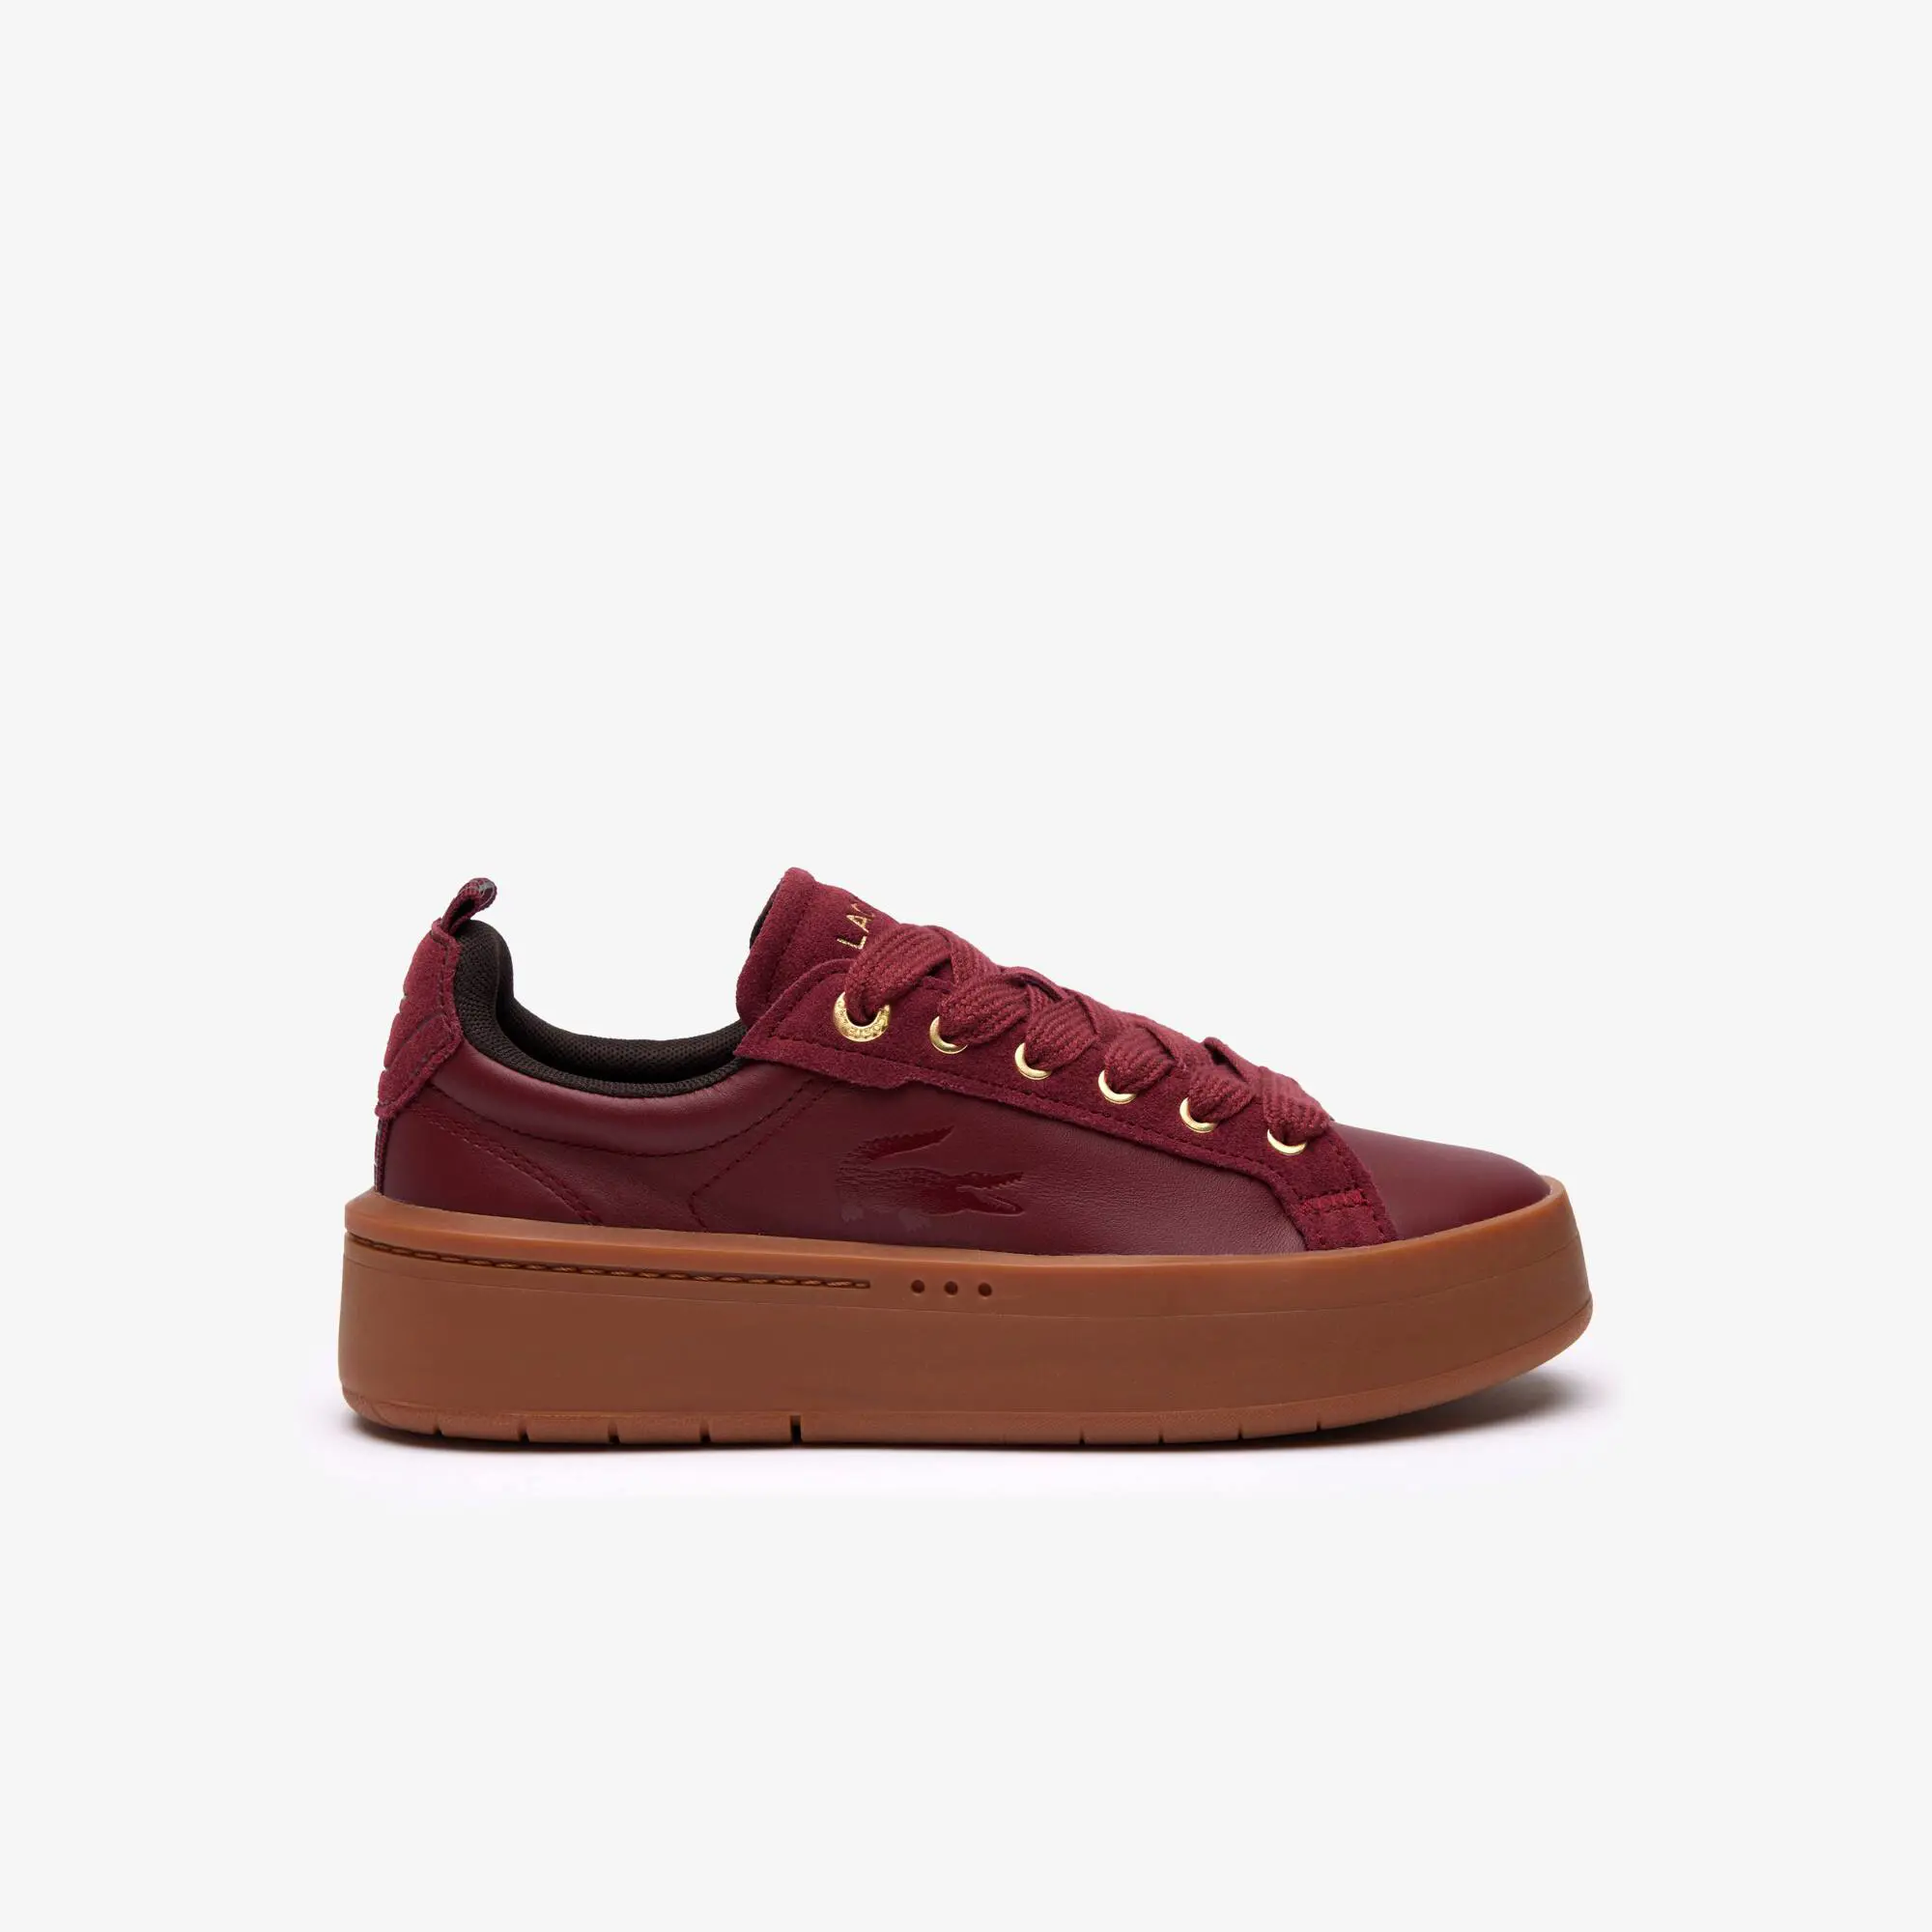 Lacoste Women's Carnaby Platform Colourblock Leather Trainers. 1